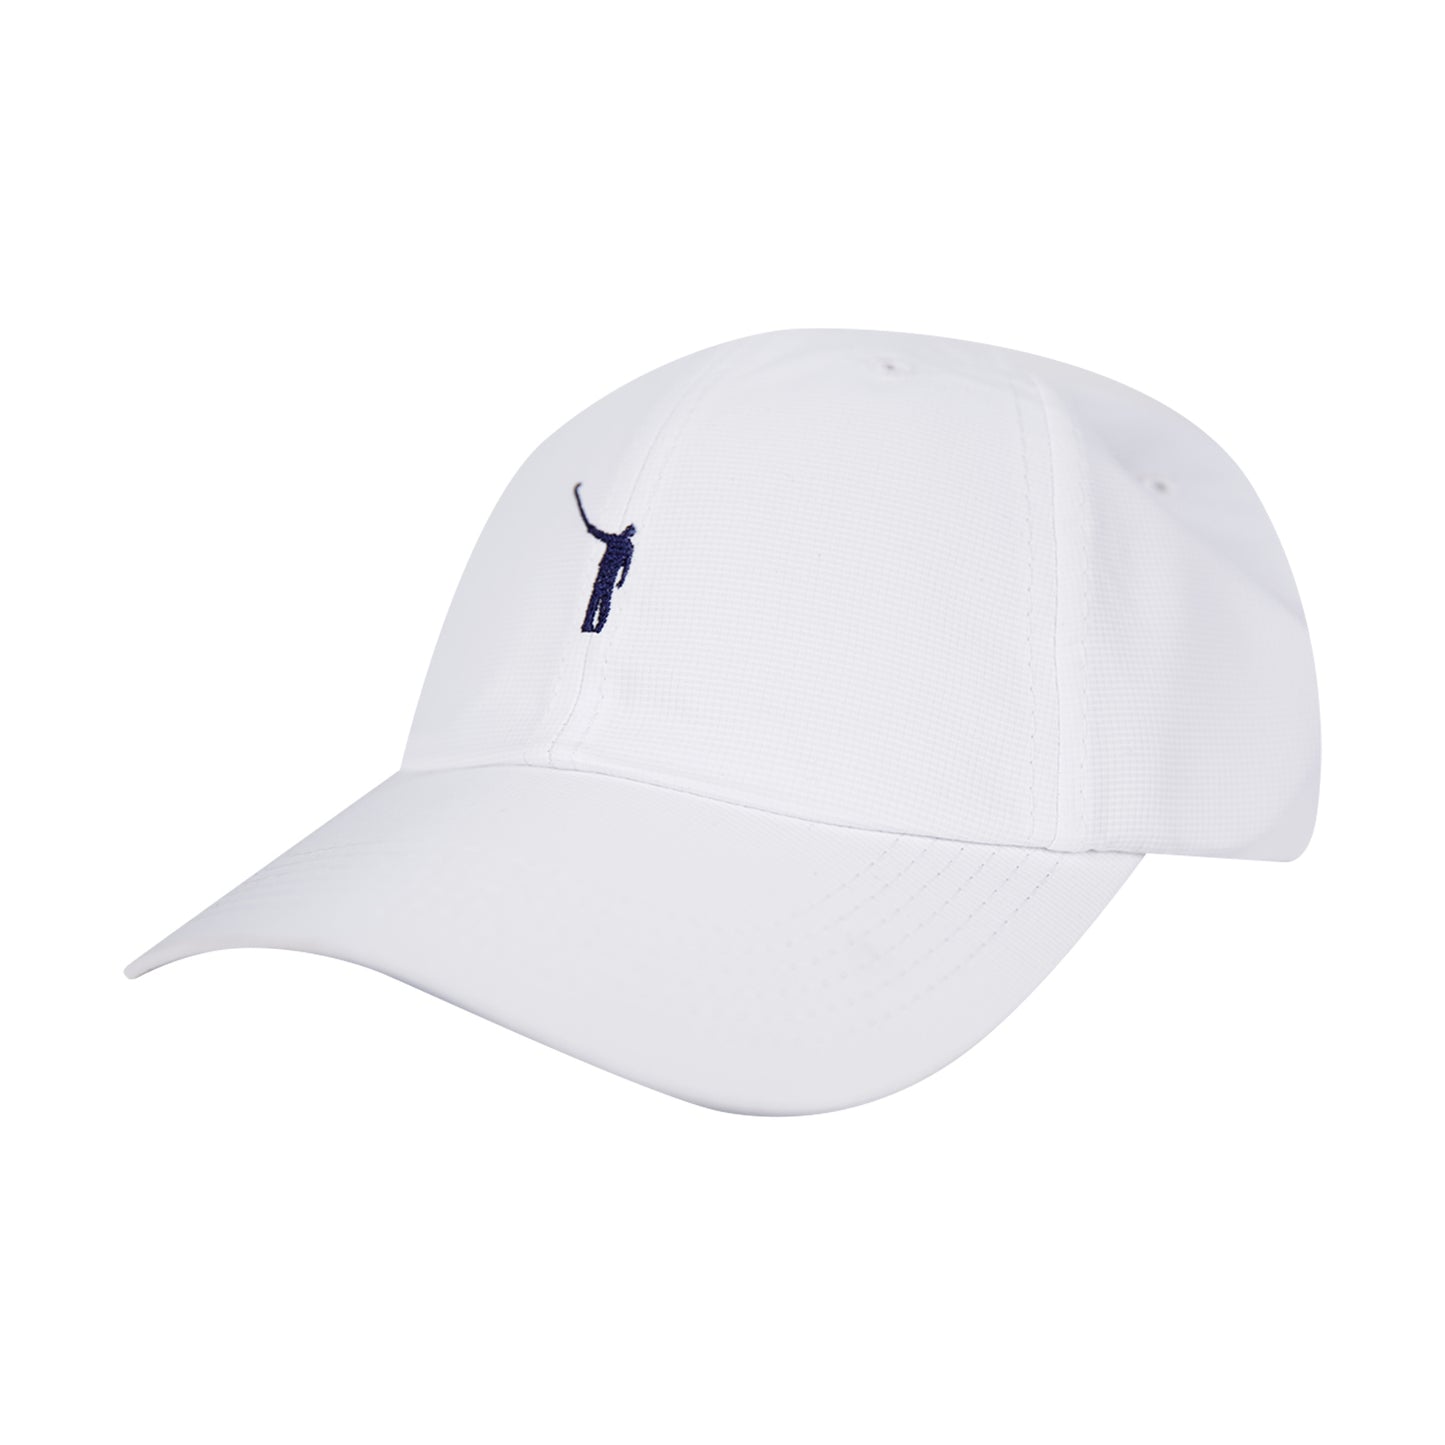 The No Laying Up XL Hat | White w/ Navy Logo